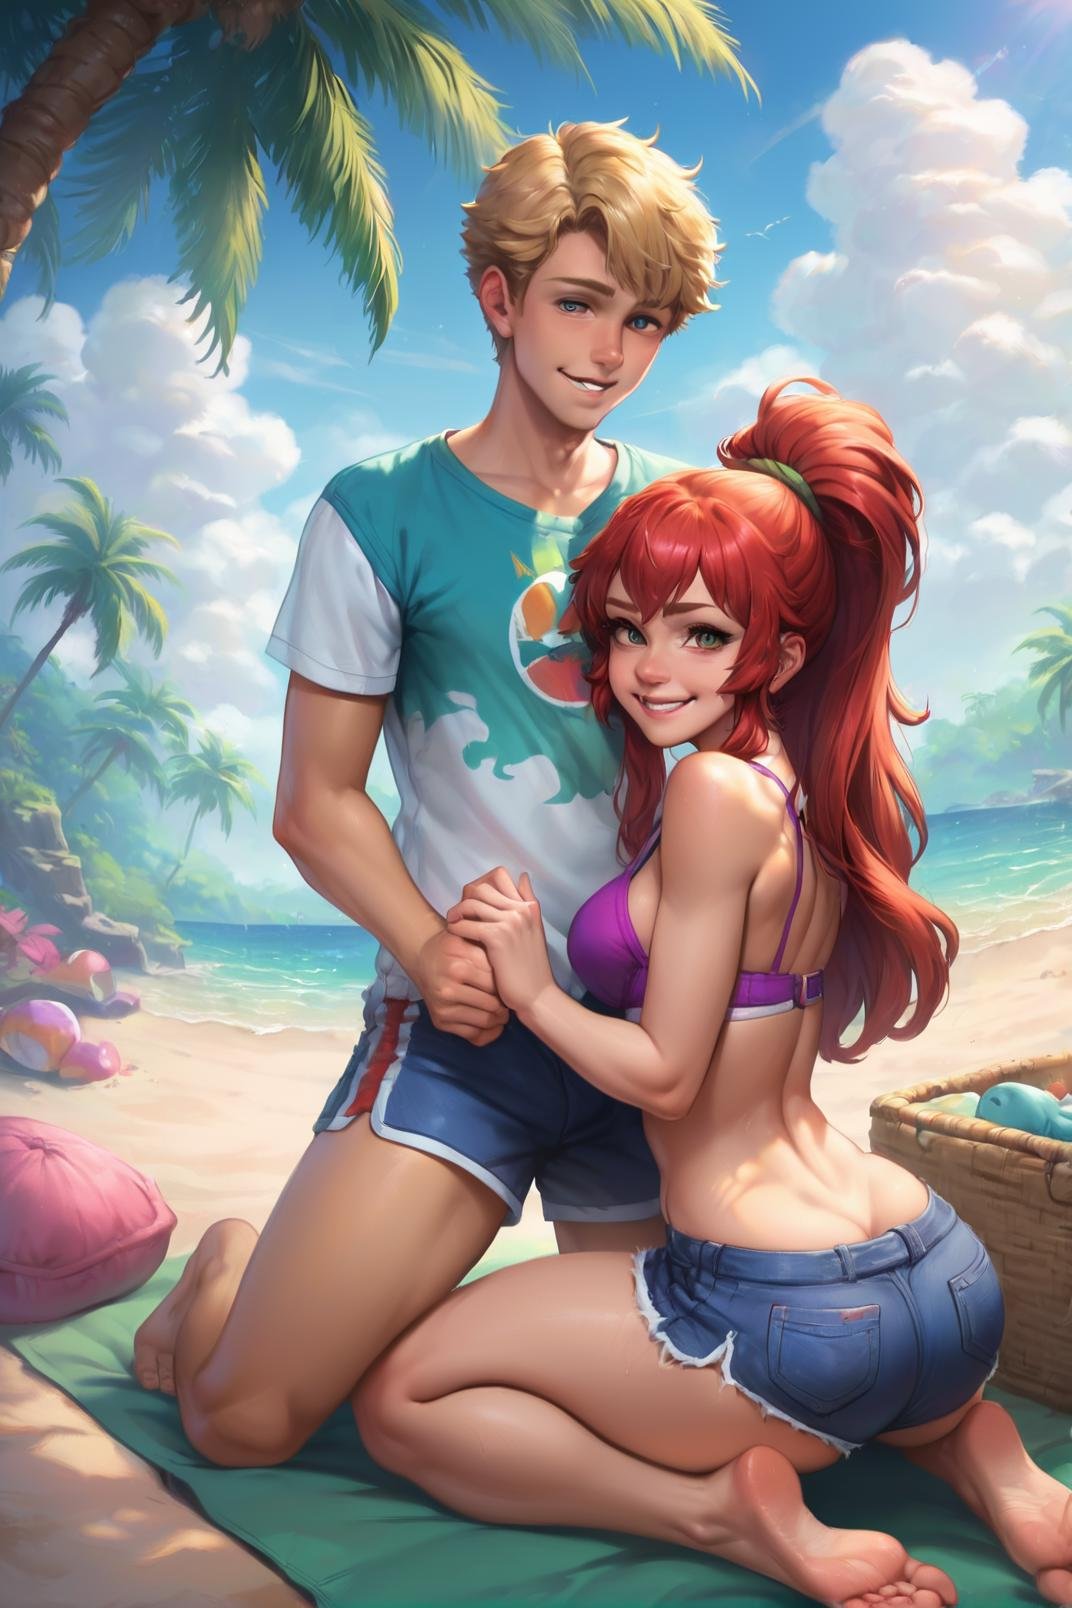 (zPDXL), 1girl, 1boy, sitting heads together,  on a tropical beach, smiling, wearing shirt and shorts, morning sunlight, tiki hut, palm trees, cloudy sky